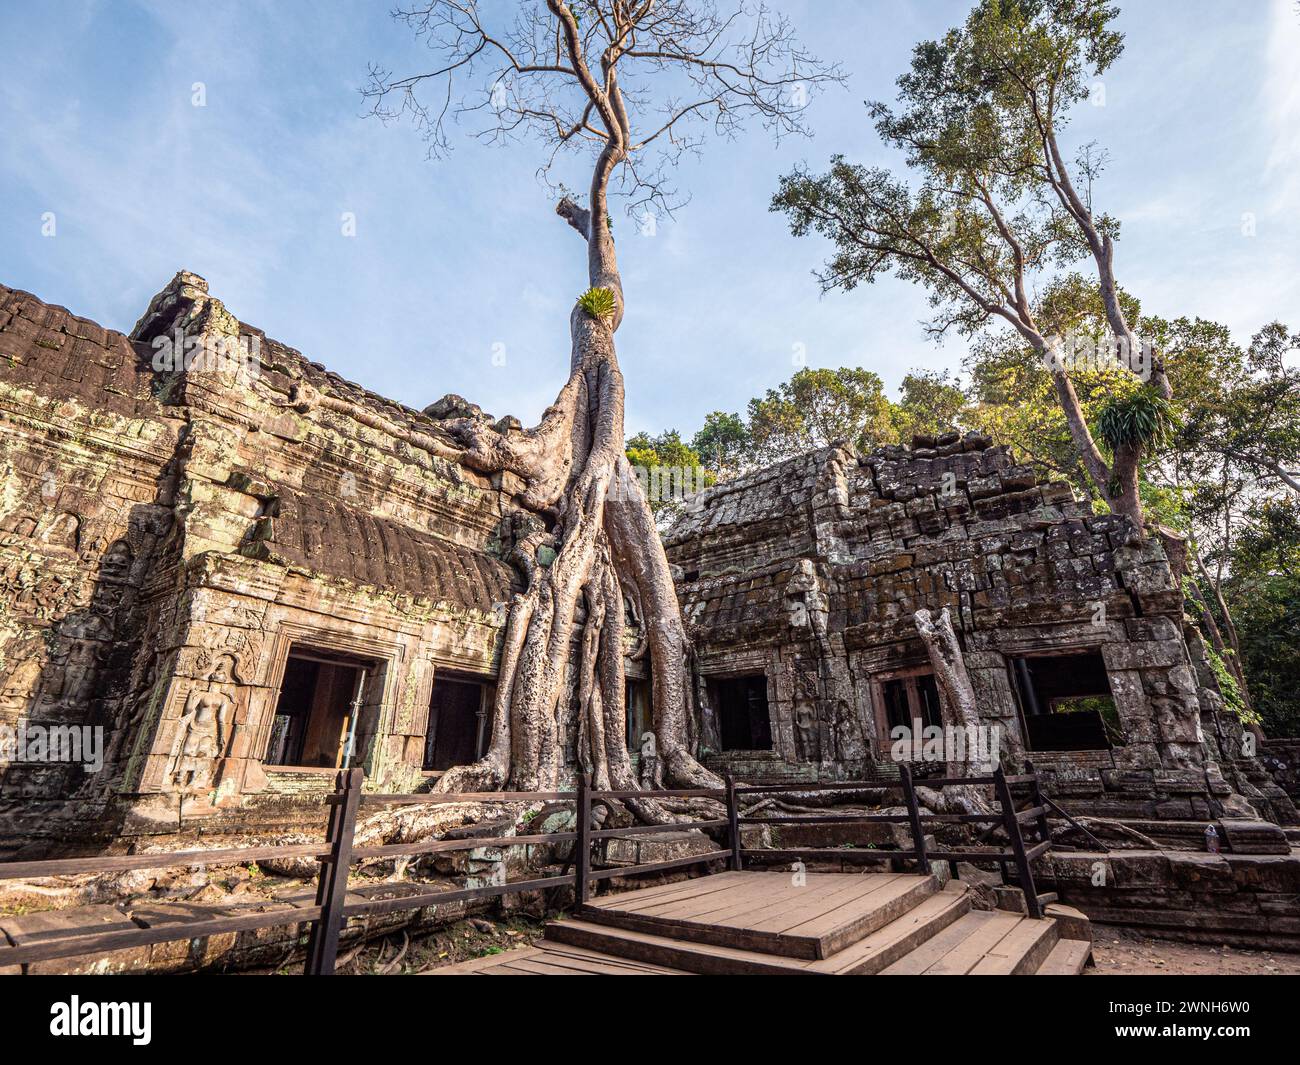 Angkor Wat - The Original Tomb used for Filming Tomb Raider Stock Photo